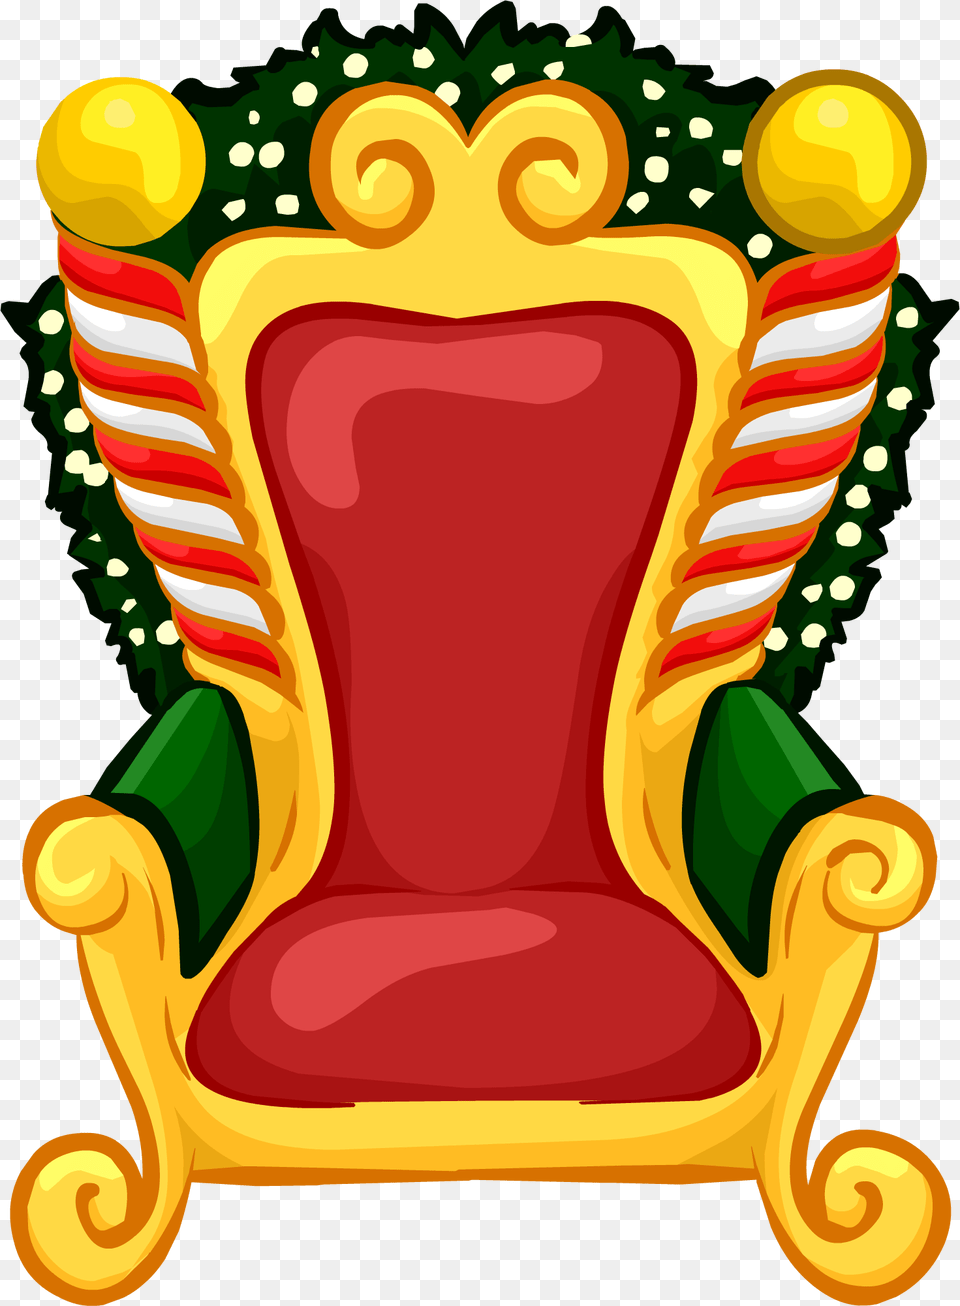 Club Penguin Rewritten Wiki Club Penguin, Furniture, Throne, Chair, Dynamite Free Png Download